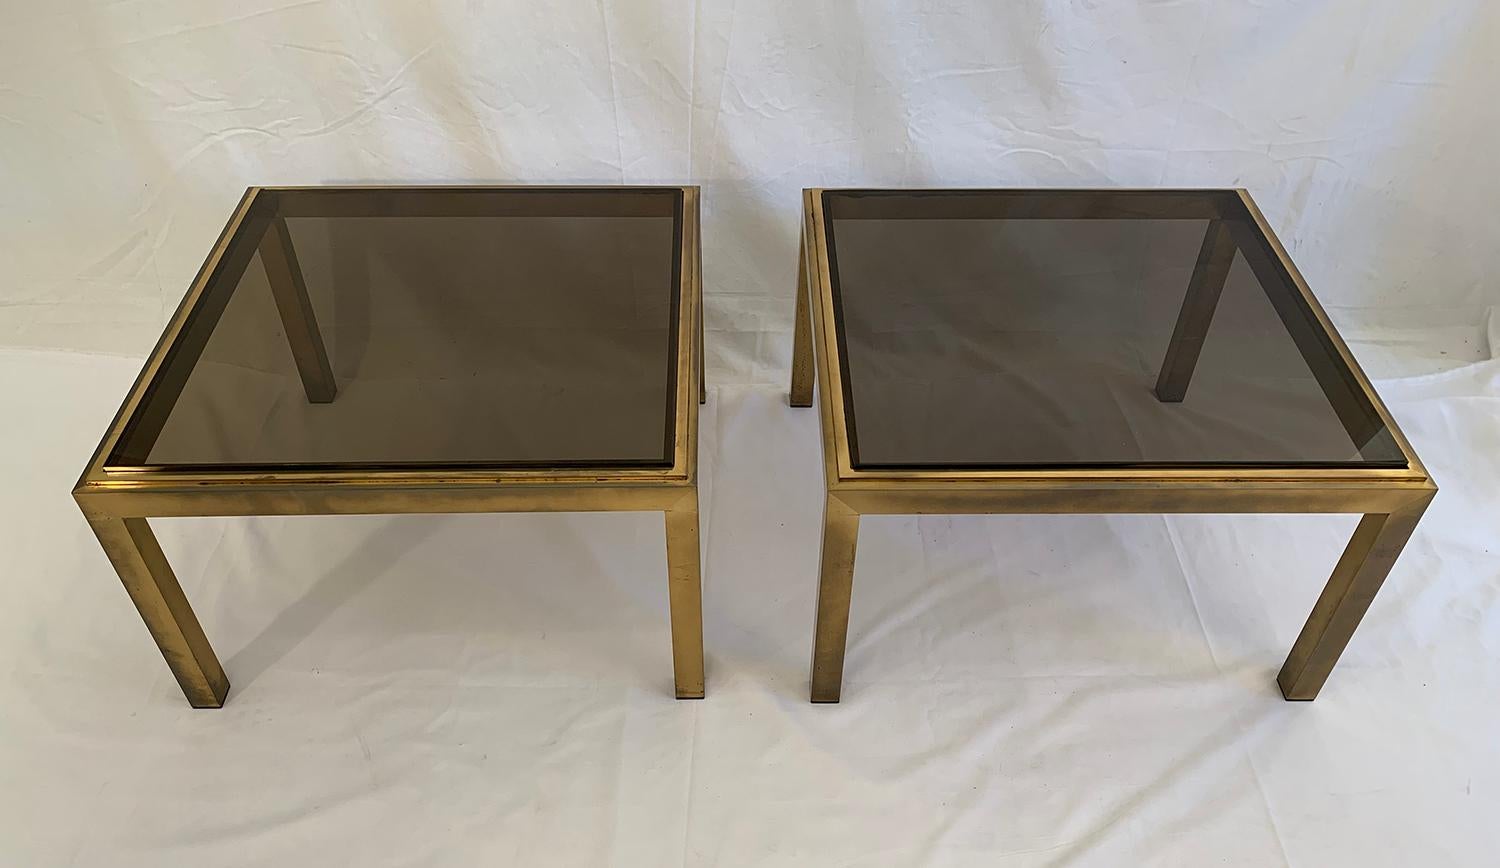 Beautiful set of brushed brass end tables, topped with a polished brass frame and a smoked glass top. The brass is very nicely patinated and the pair dates from the 1970s.

The glass can be replaced for 200 Euros

Magnifique ensemble de bouts de